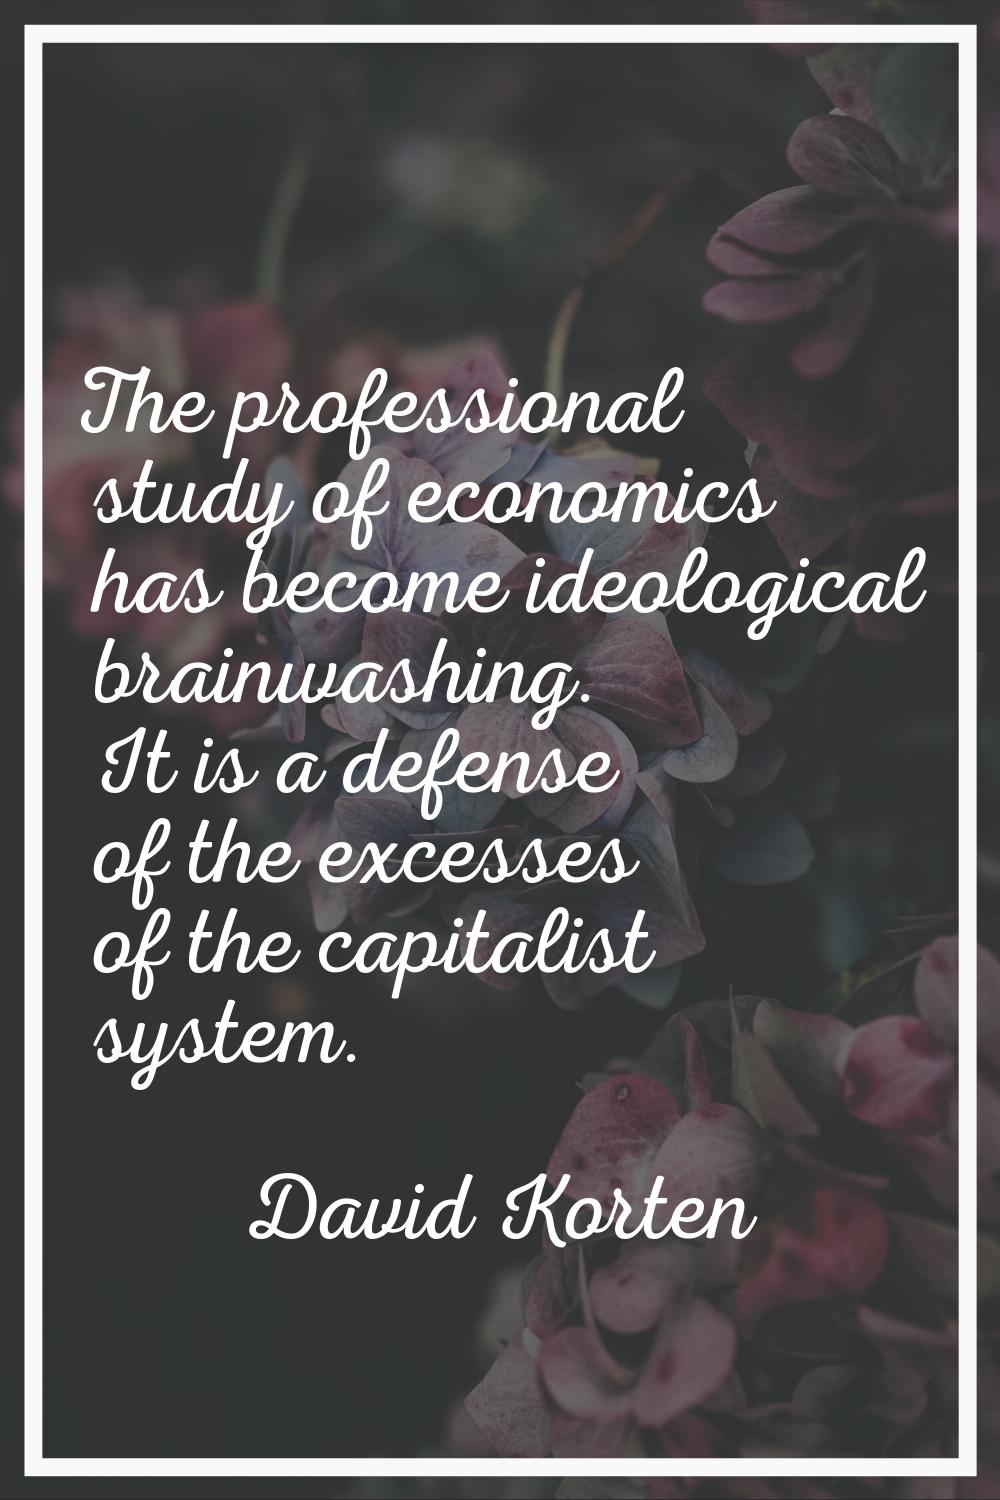 The professional study of economics has become ideological brainwashing. It is a defense of the exc